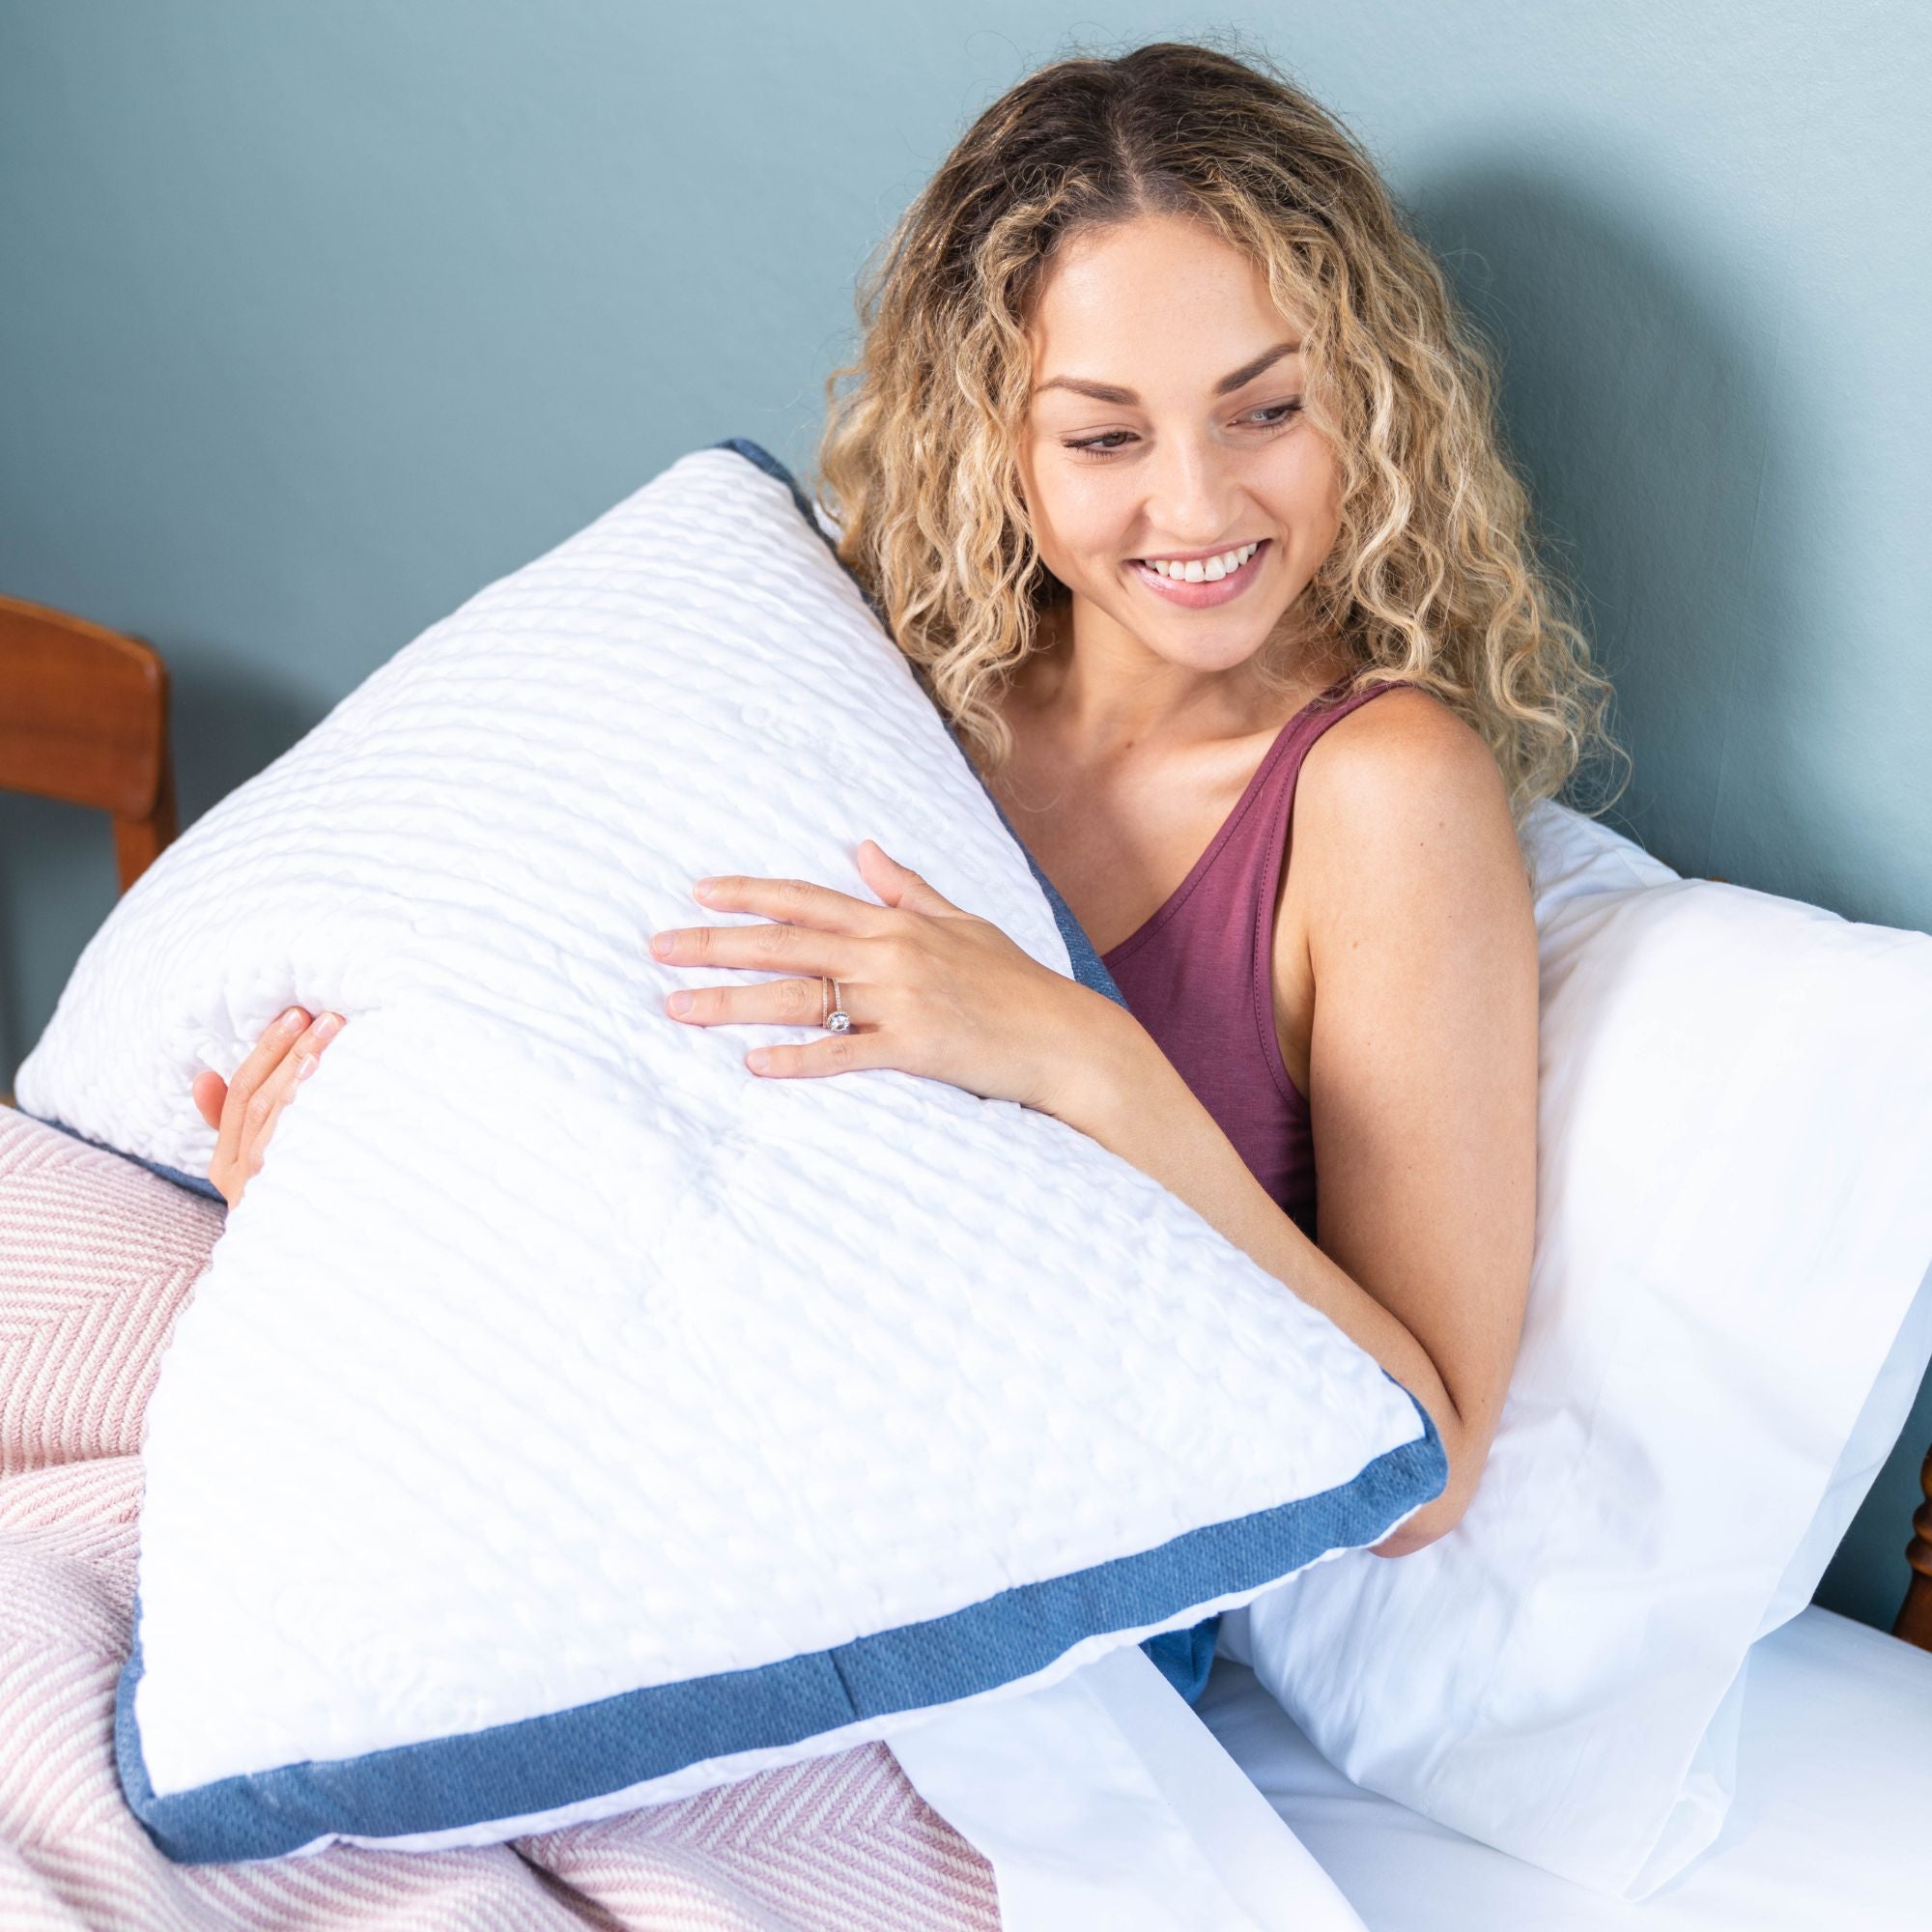 lady holding a foam core pillow in bed